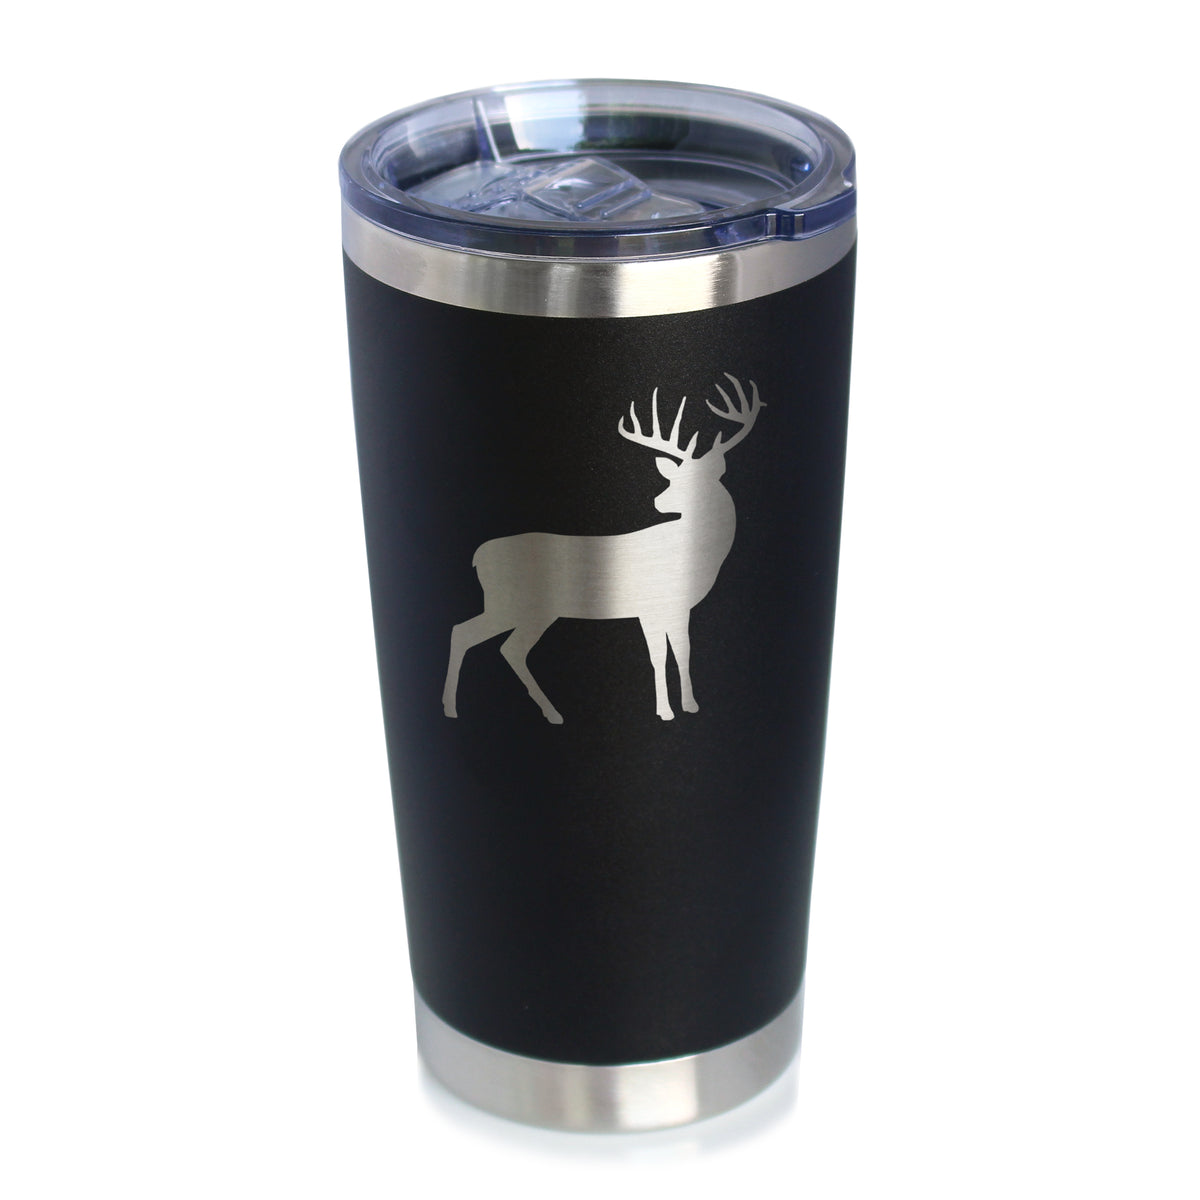 Deer Silhouette - Insulated Coffee Tumbler Cup with Sliding Lid - Stainless Steel Travel Mug - Rustic Outdoors Gifts and Decor for Women and Men